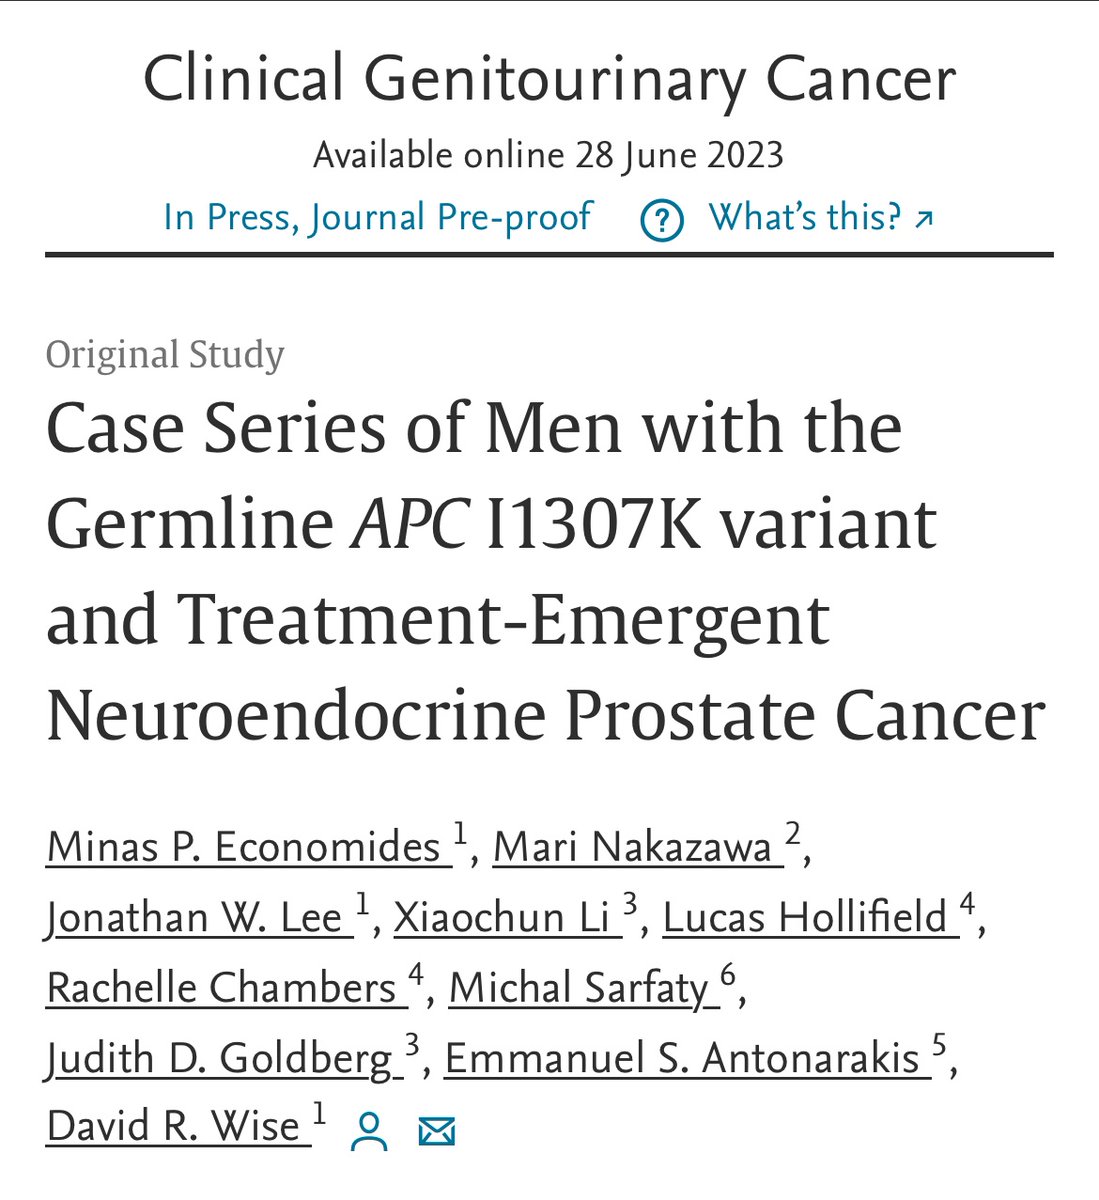 Congrats @minaseconomides for this provocative (hypothesis-generating) paper potentially linking germline APC mutations to neuroendocrine prostate cancer. sciencedirect.com/science/articl…